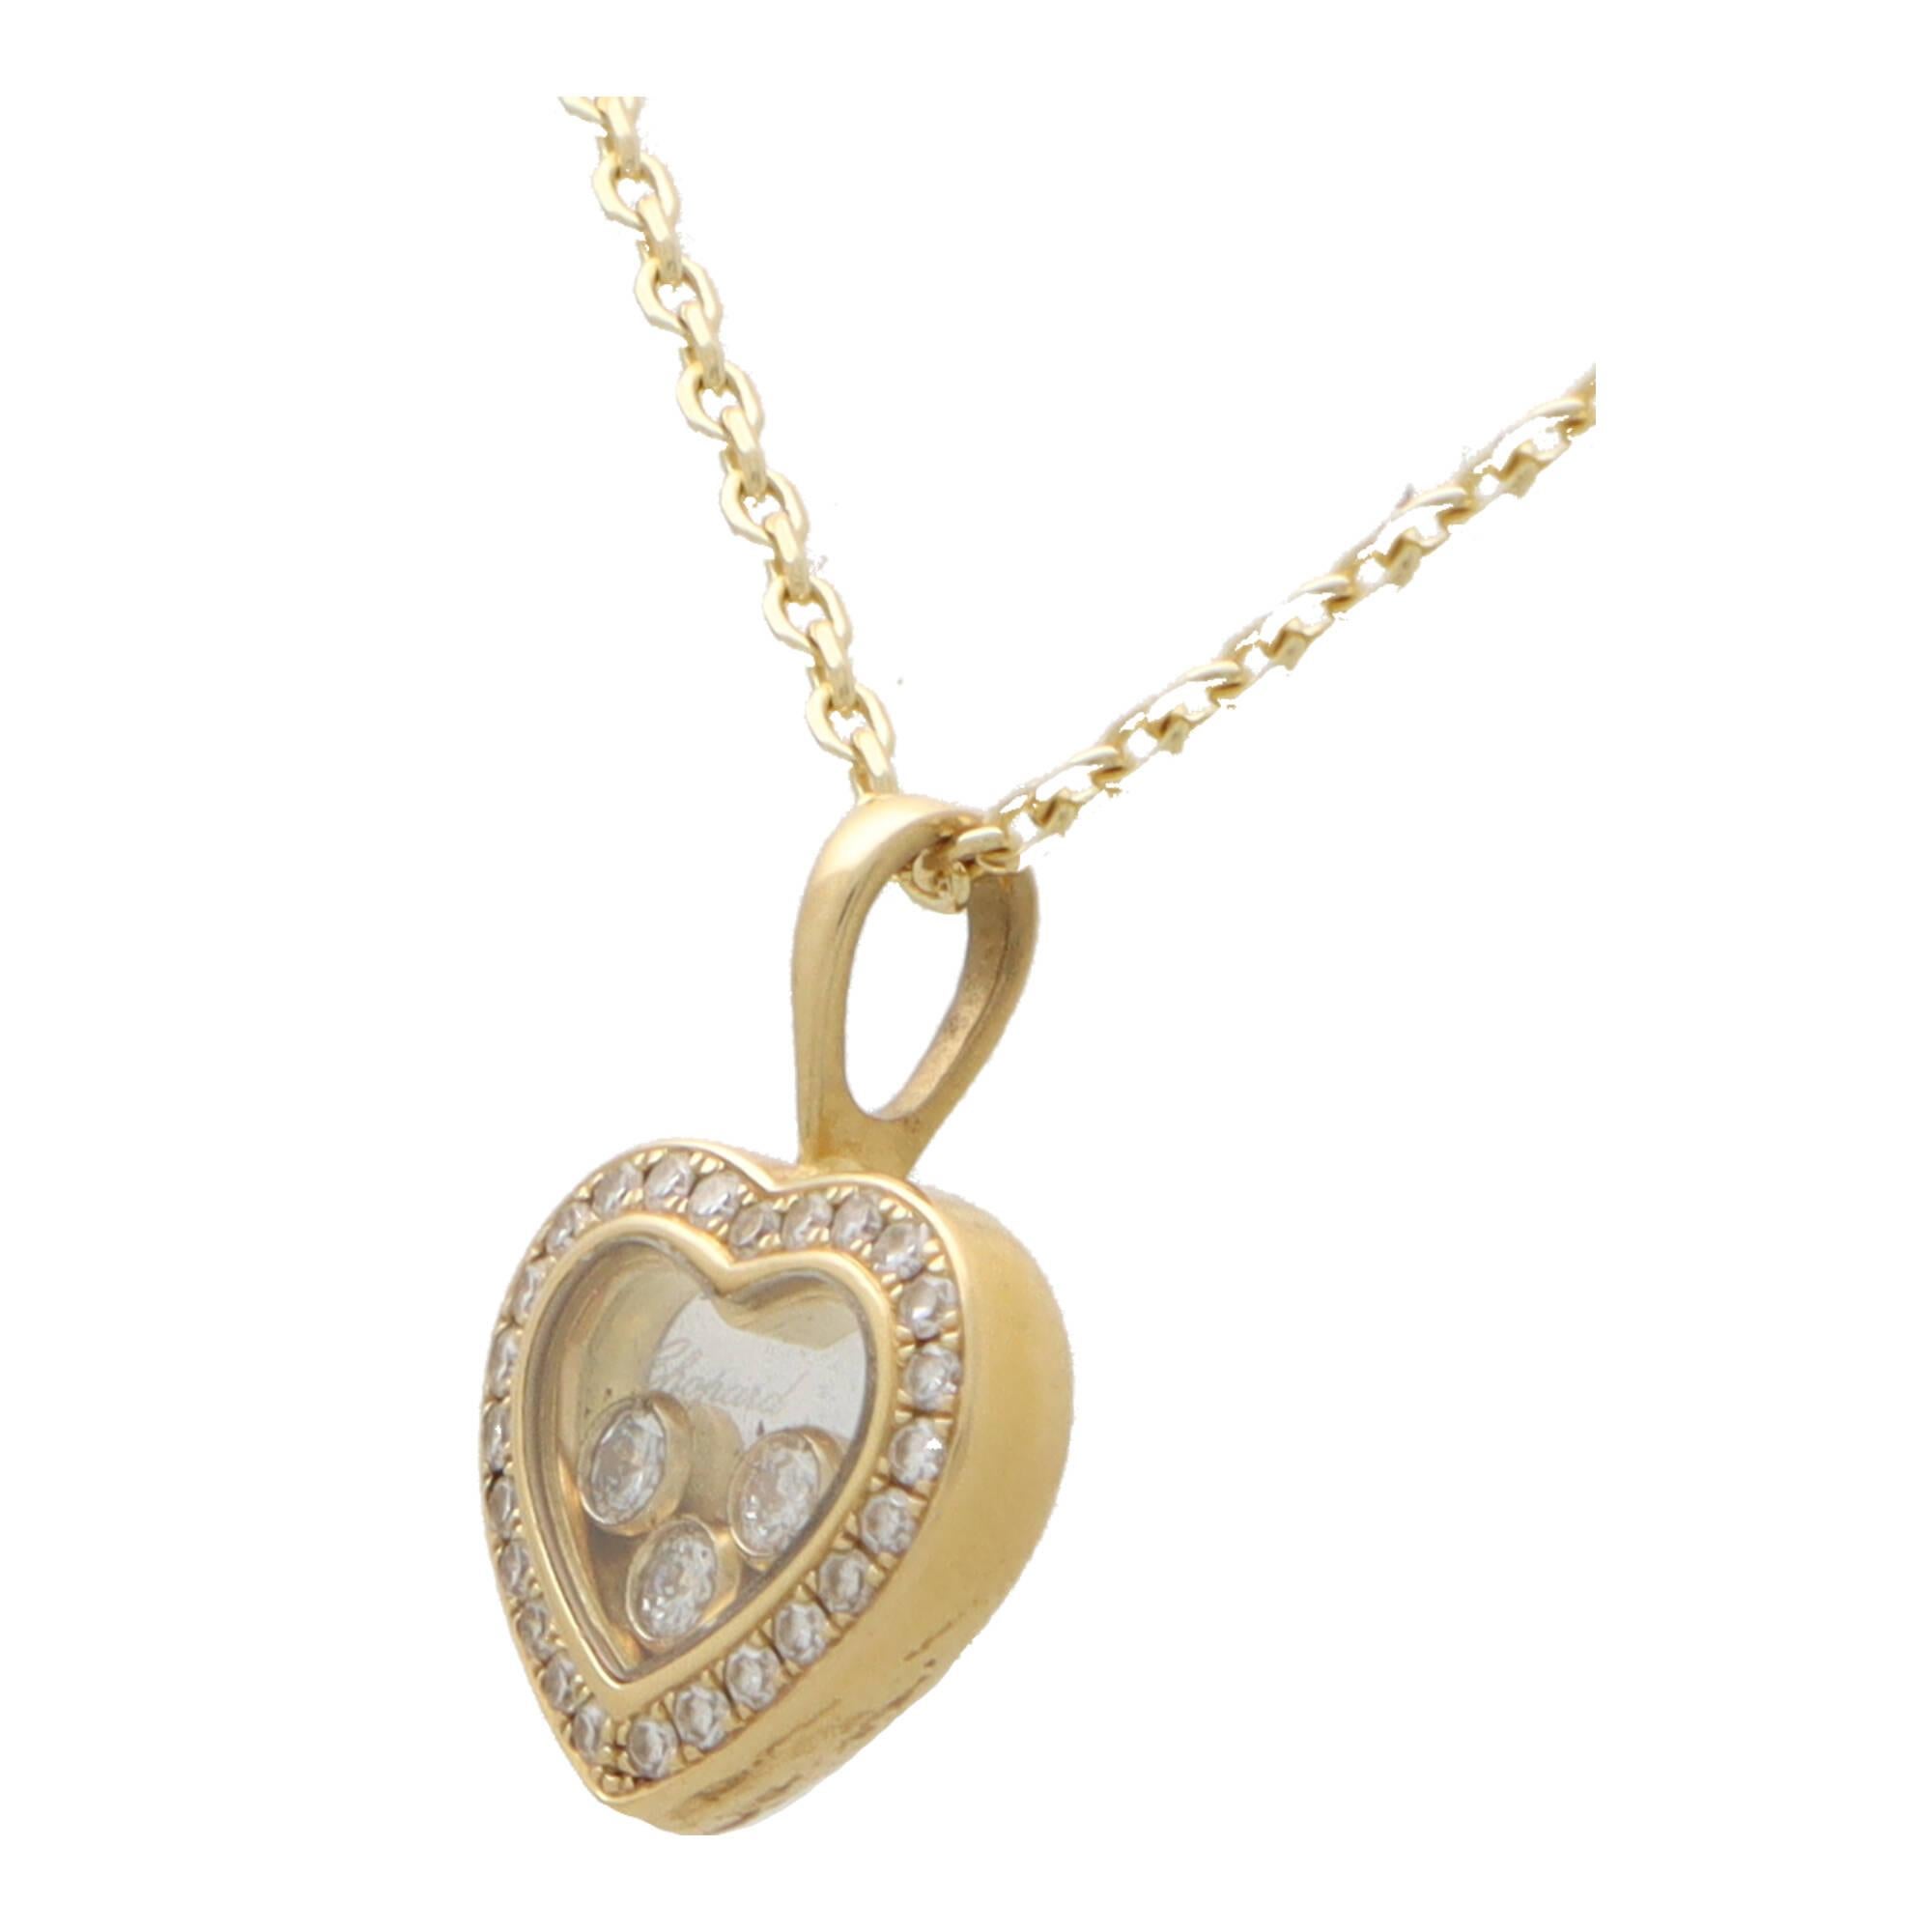 A stylish vintage Chopard ‘Happy Diamond’ pendant necklace set in 18k yellow gold.

The pendant is a discontinued design in the Happy Diamond collection and features a open-heart motif, with three floating rub over set diamonds in the centre. The